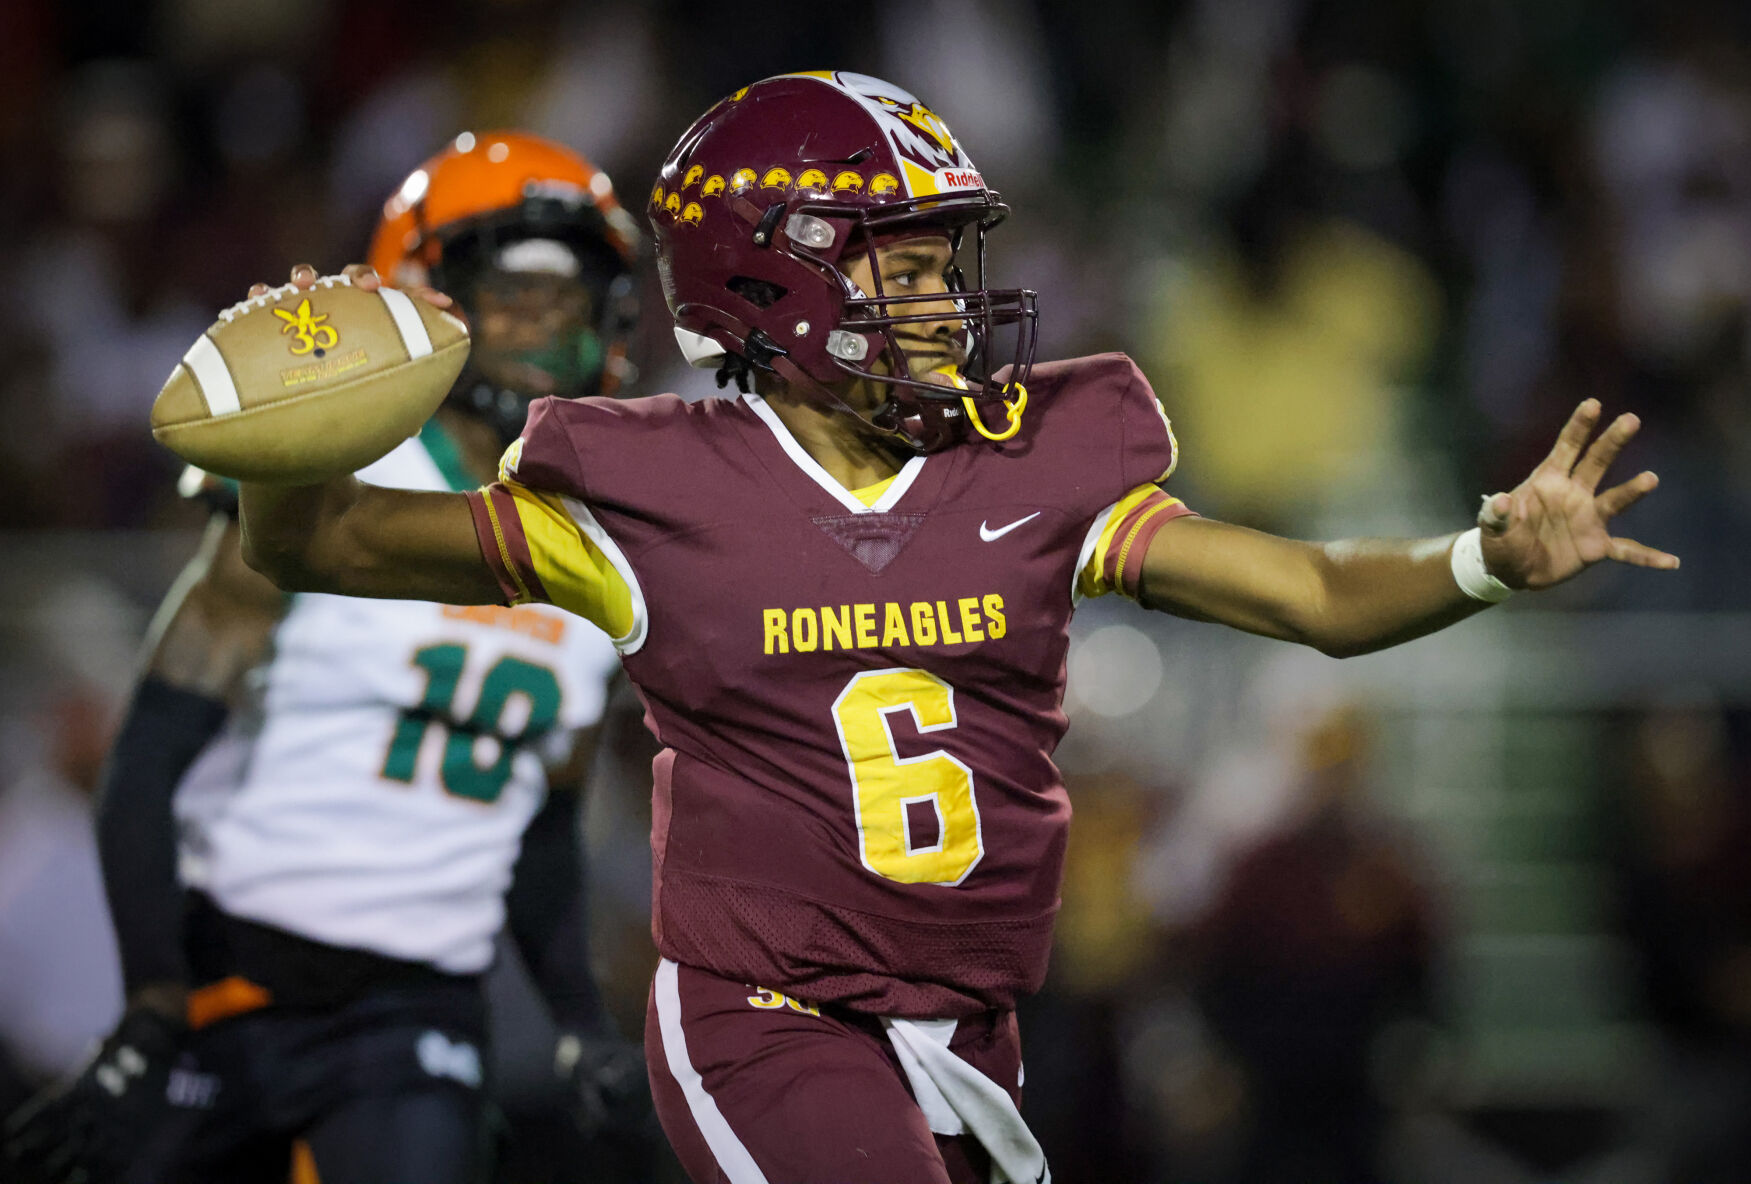 Who was the top football player in the New Orleans area in Round 2 of the playoffs? Vote now.